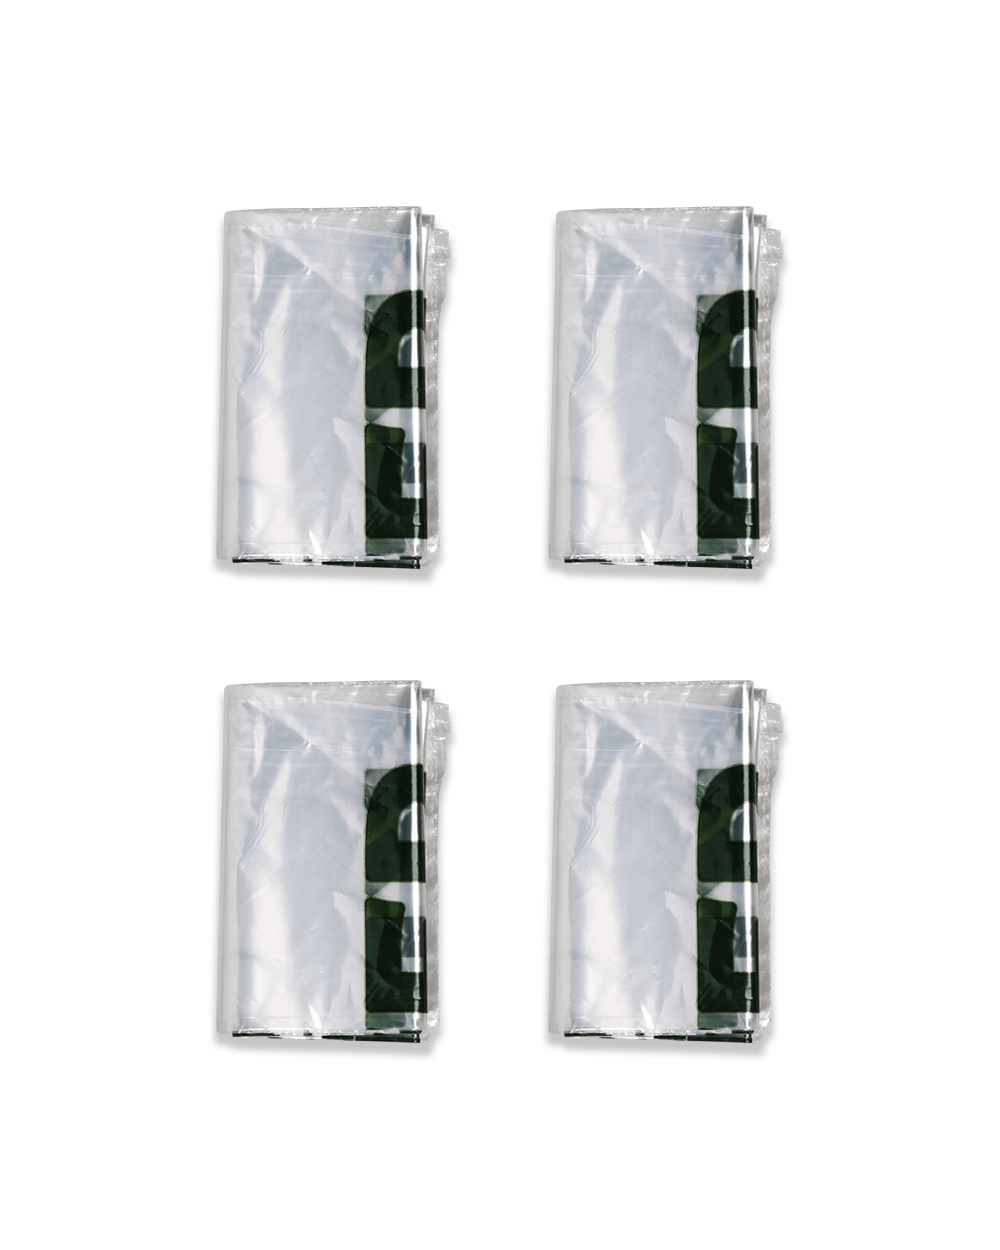 https://cdn.shopify.com/s/files/1/1395/1925/products/keep-nature-wild-4-pack-keep-nature-wild-bio-degradable-trash-bags-20269479329945.png?v=1681169640&width=1000